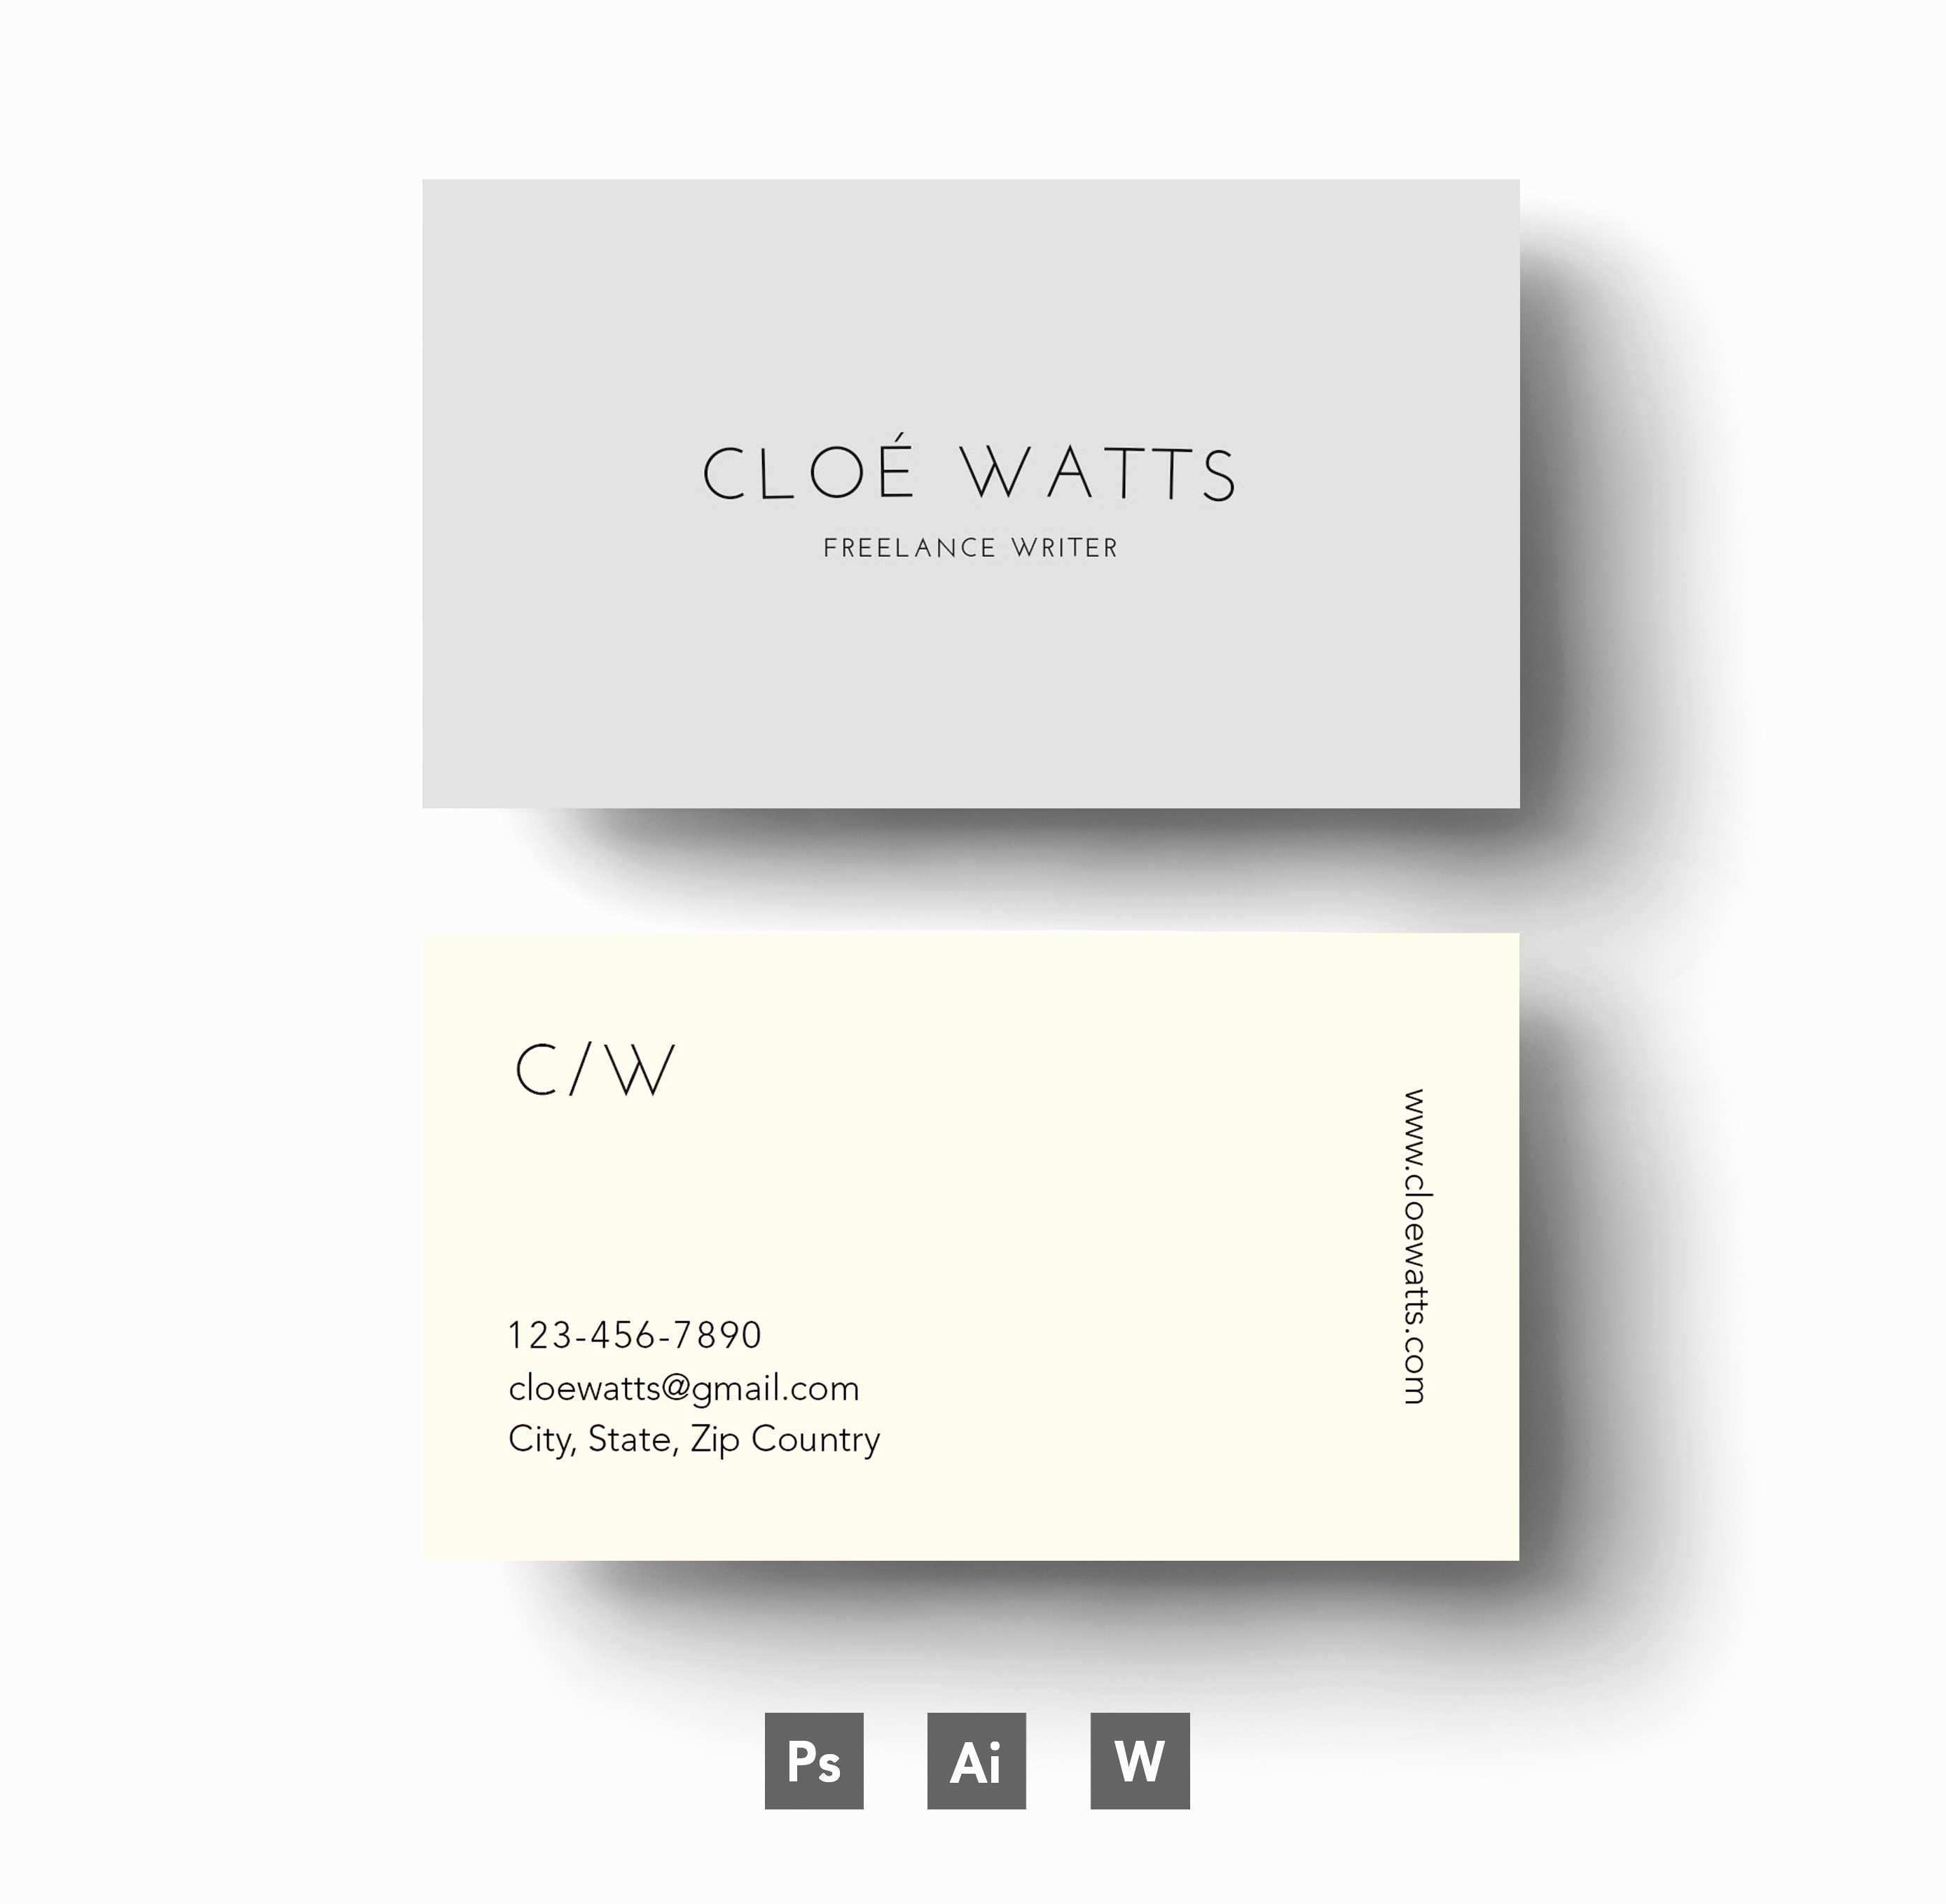 99 Free Business Card Template Avery 8876 With Stunning Design with Business Card Template Avery 8876